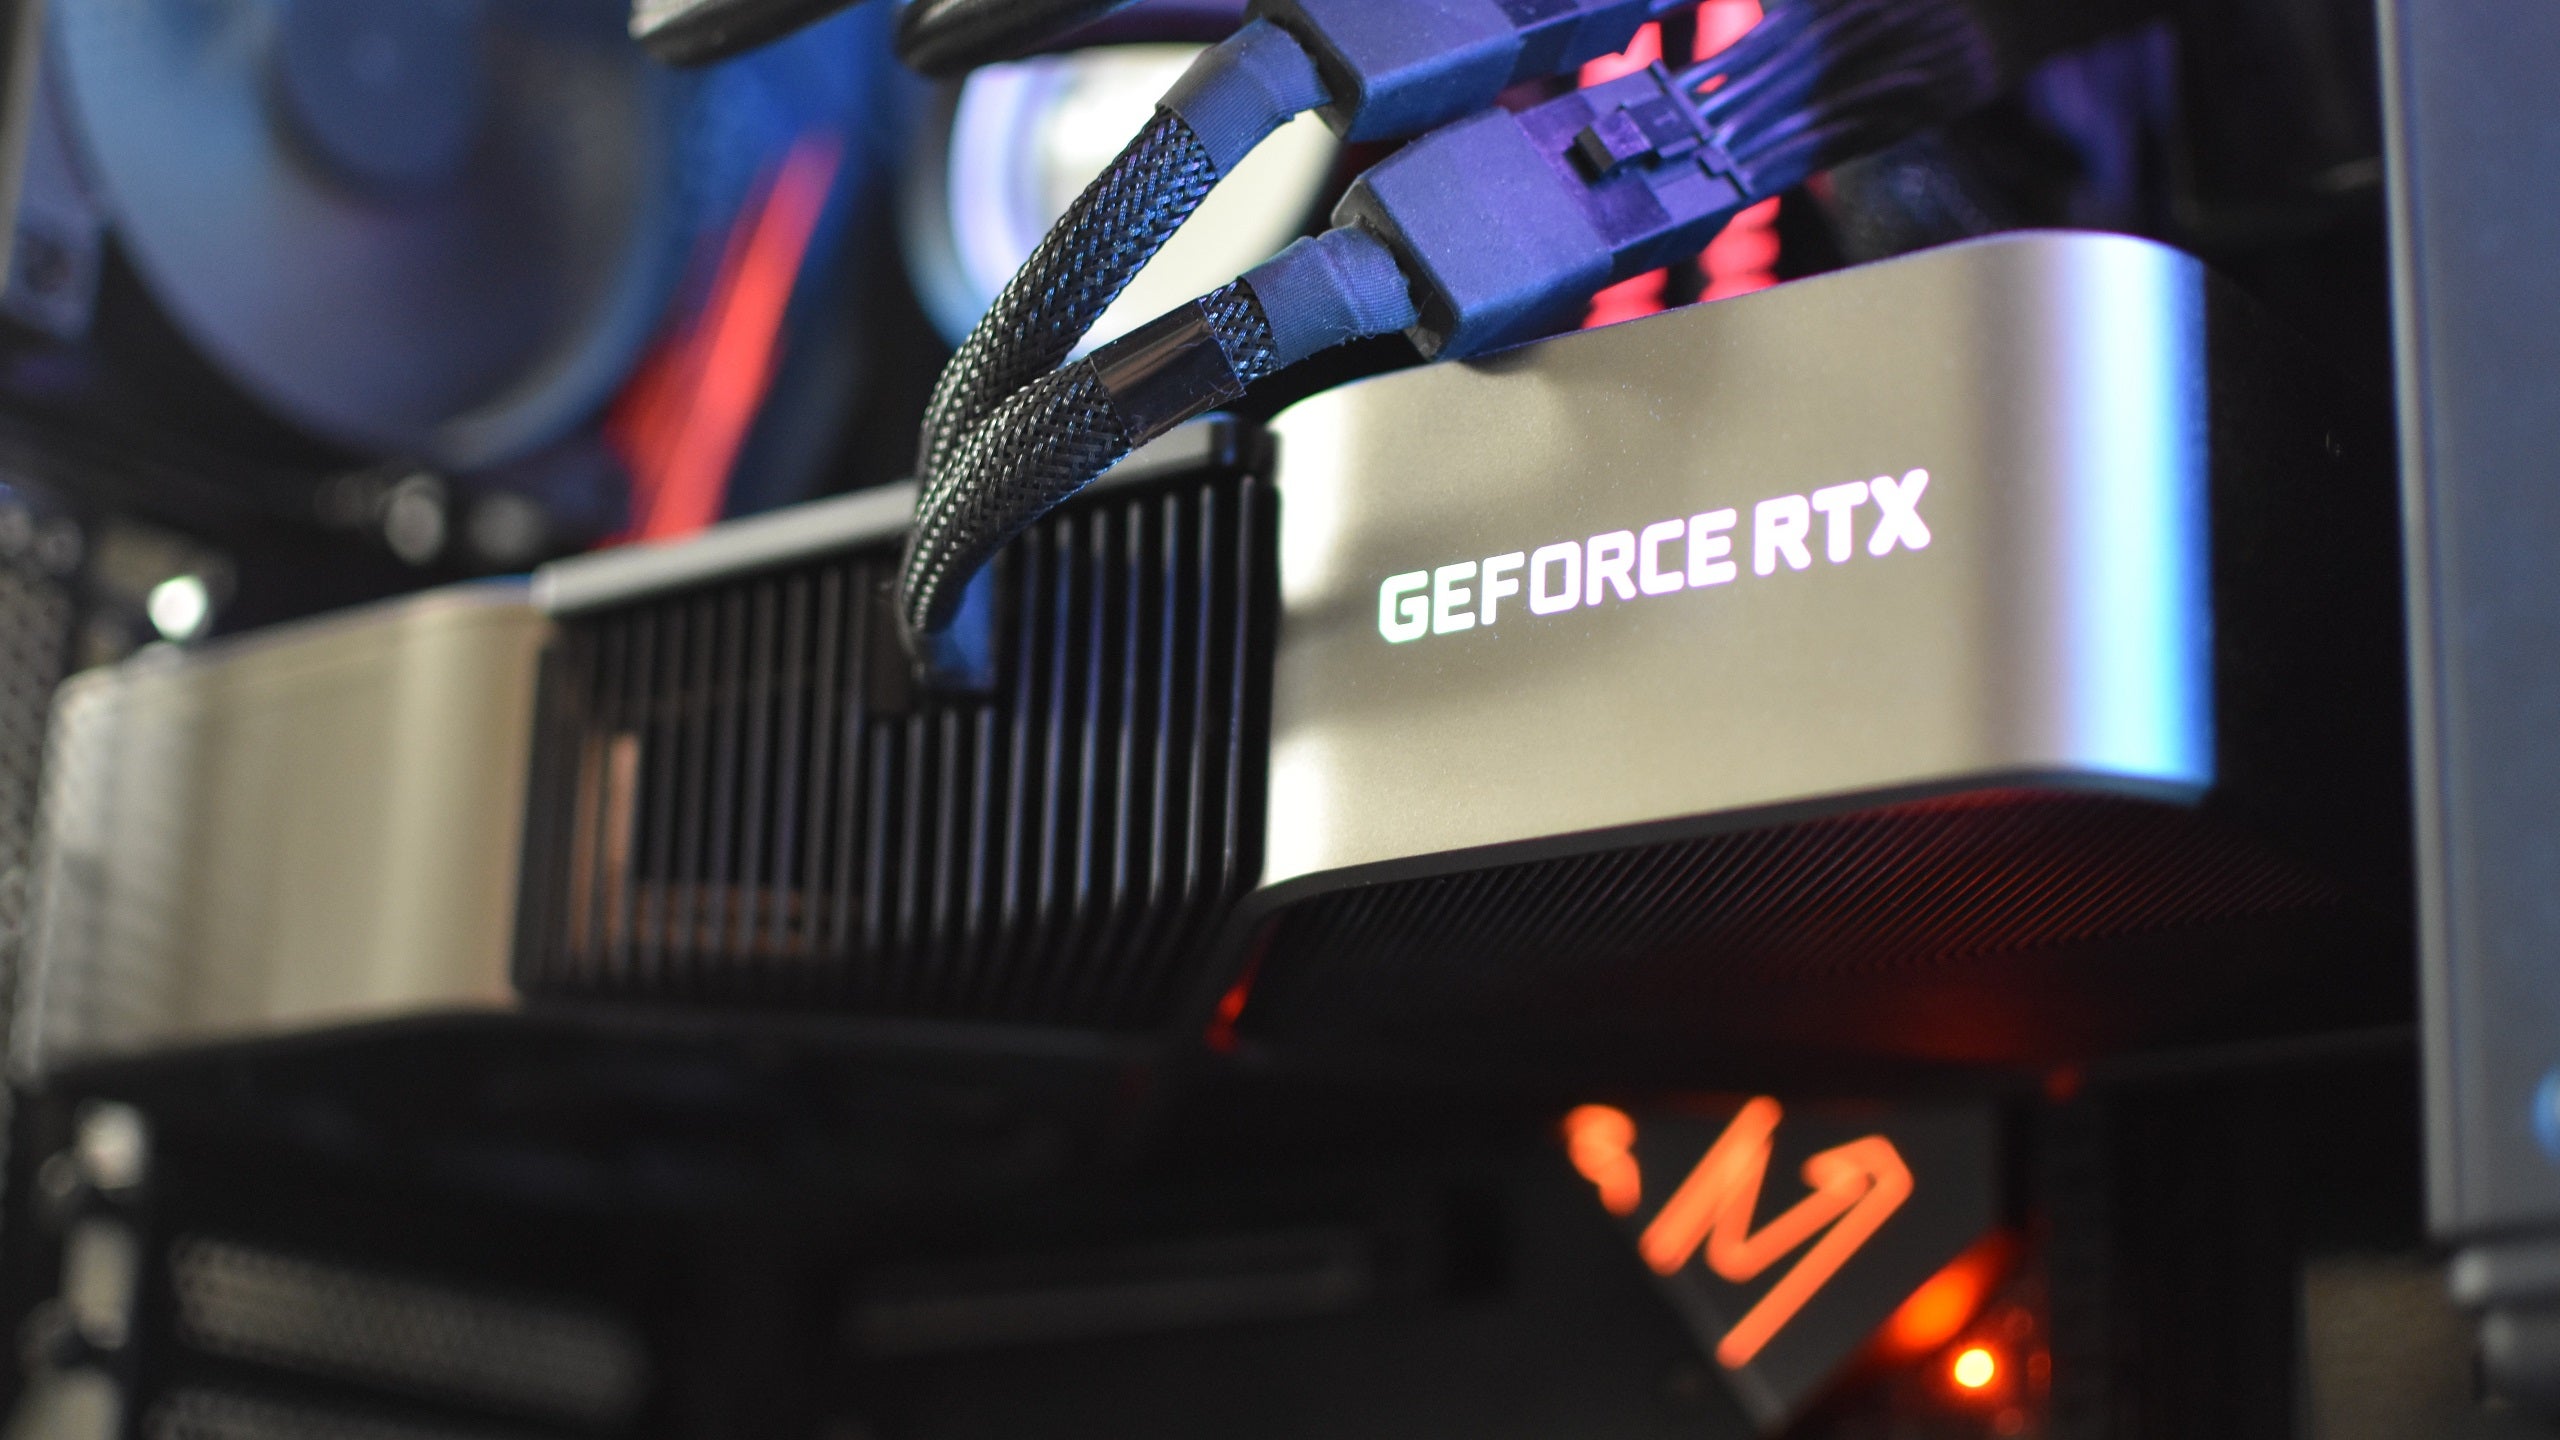 An Nvidia GeForce RTX 3090 graphics card, installed and running inside a PC.